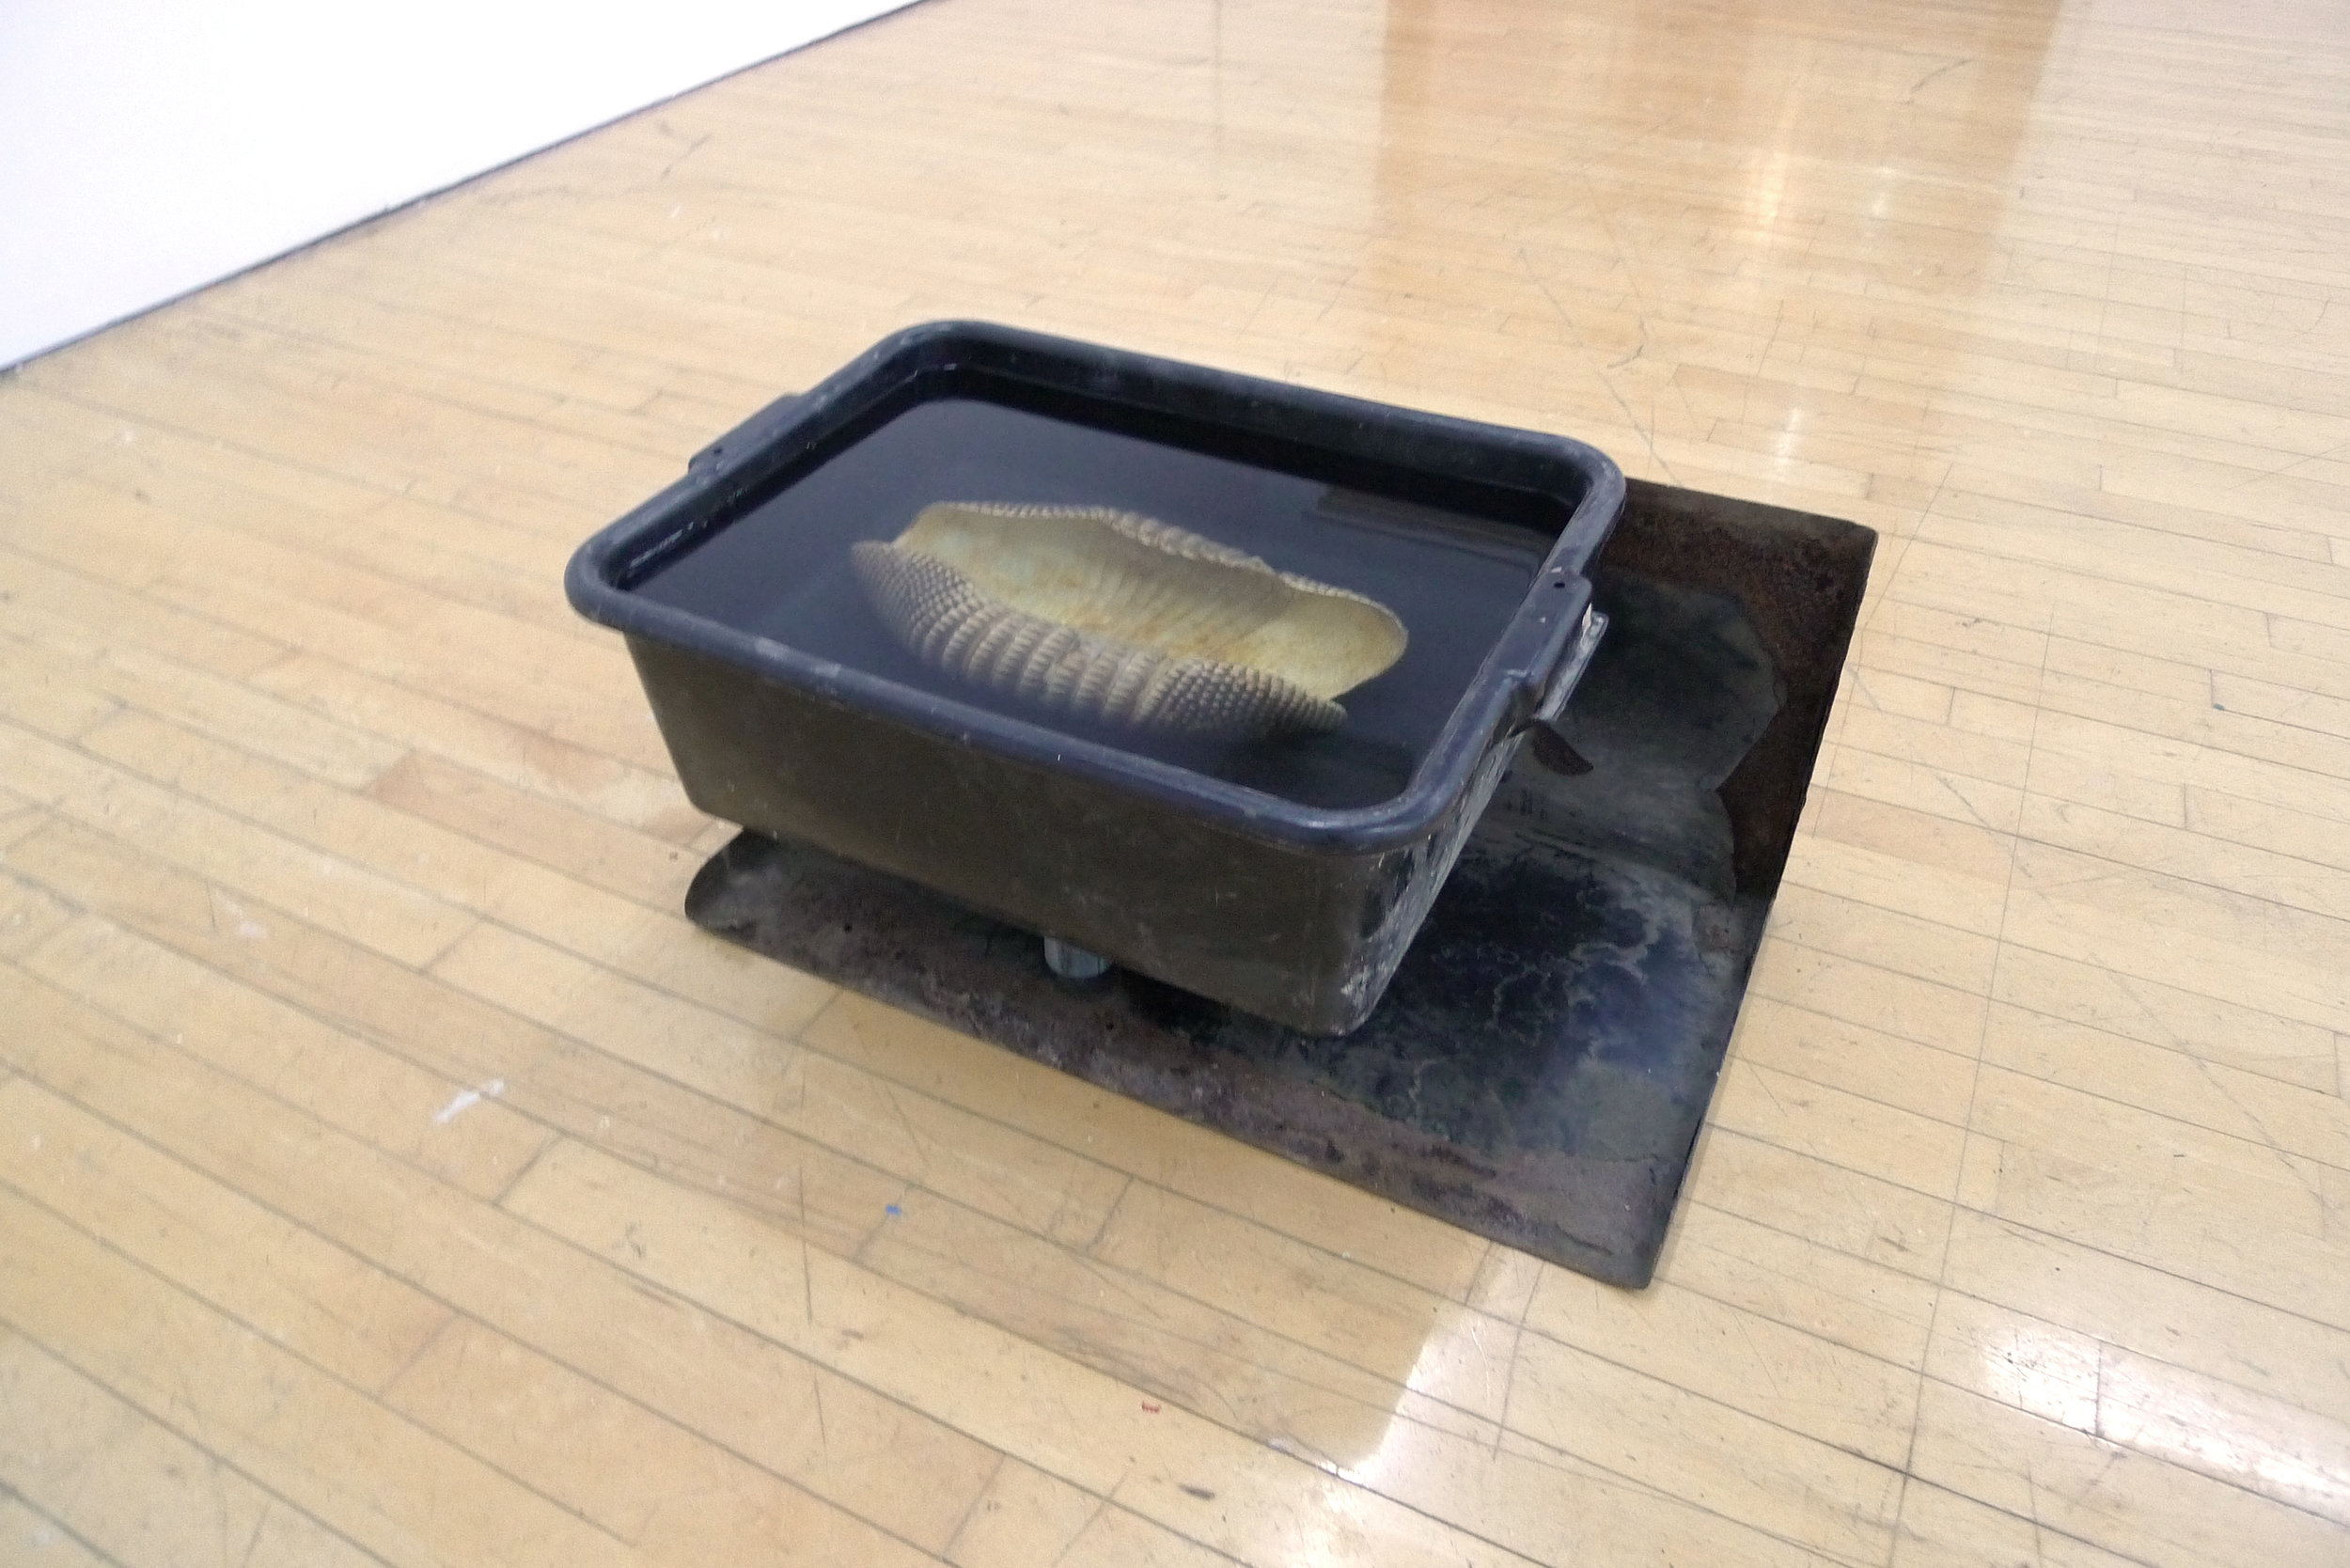  Sean Donovan yet to be titled, 2018 armadillo shell, water, formaldehyde, plastic busser's bucket, canvas stretching pliers, found metal stand 21 x 15 x 14 inches (53 x 38 x 36 cm) (SD37) 